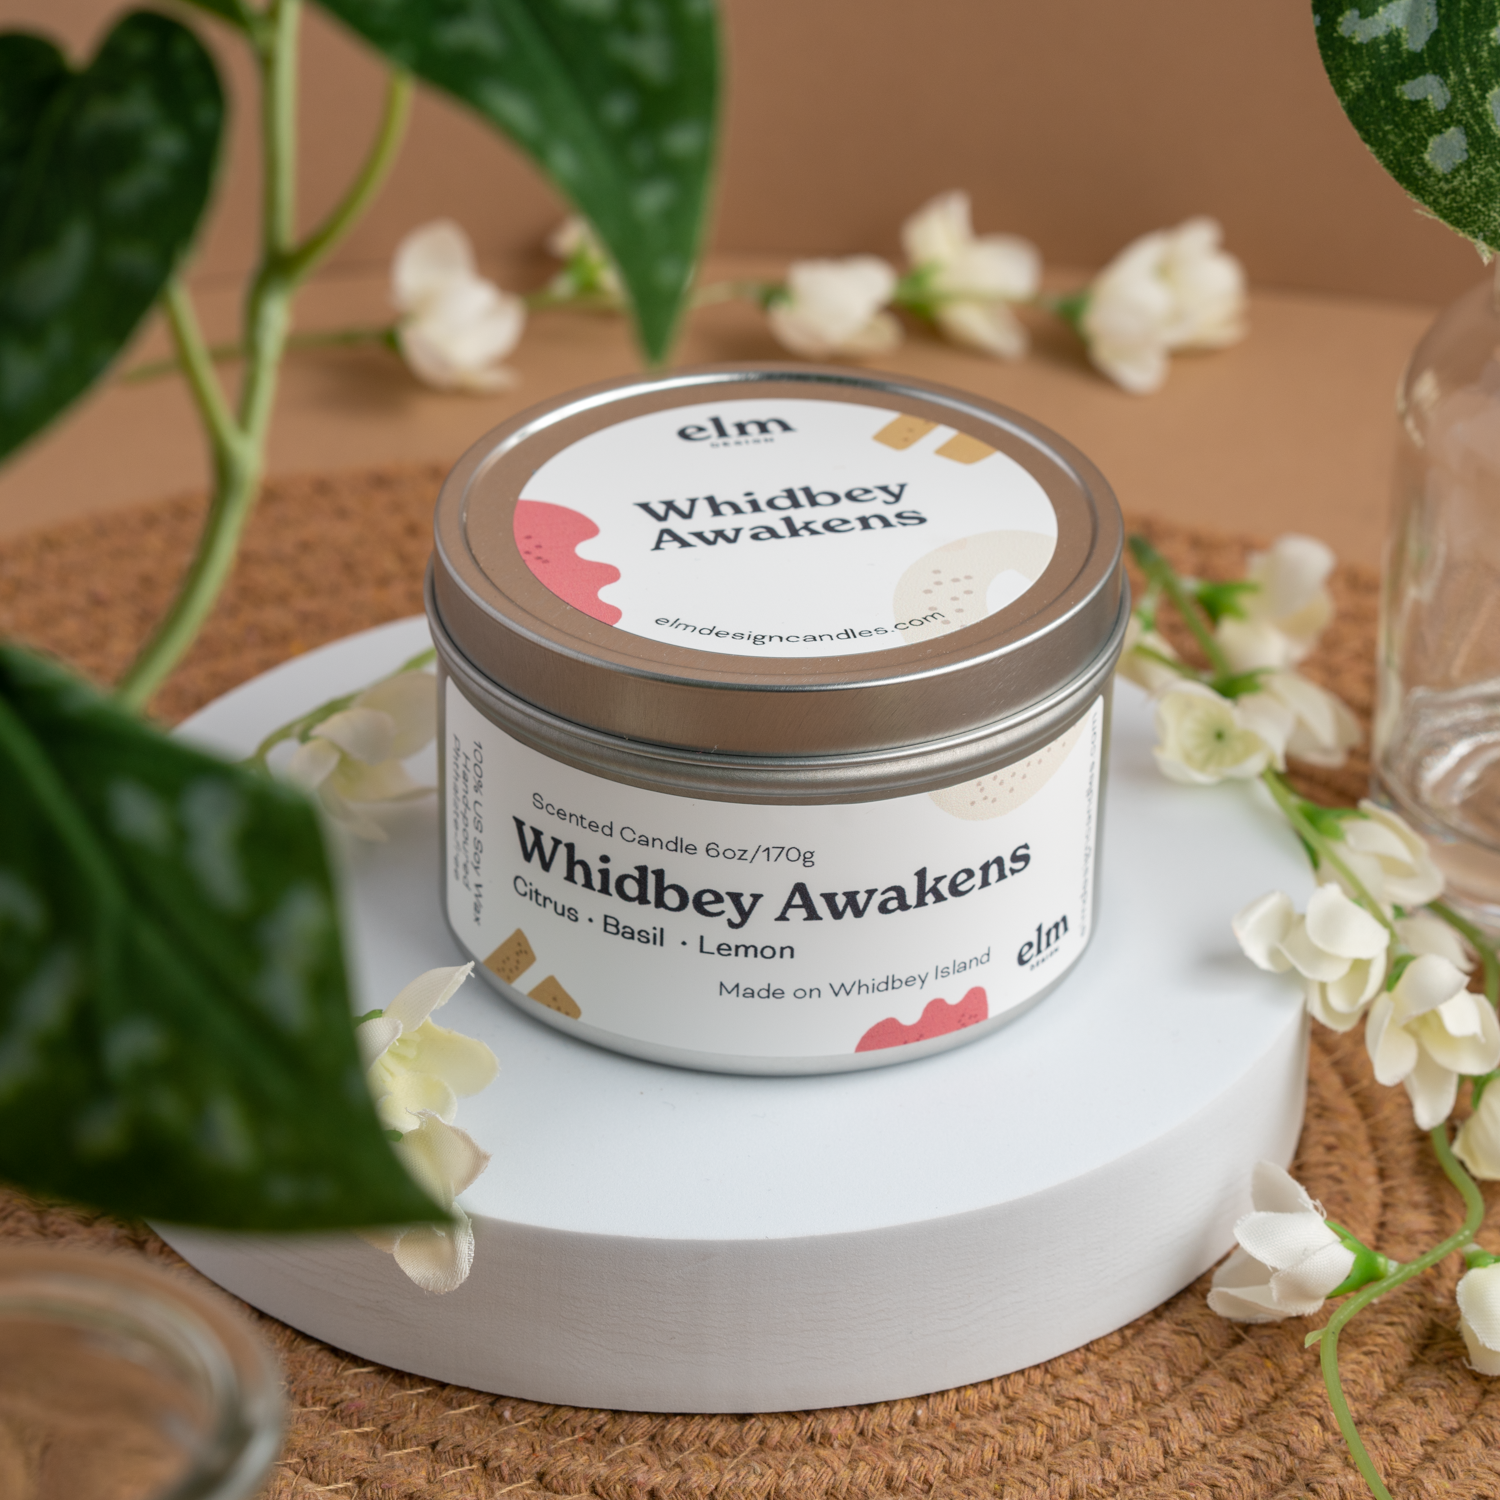 Whidbey Awakens scented soy candle in colorfully labeled 6 oz container.